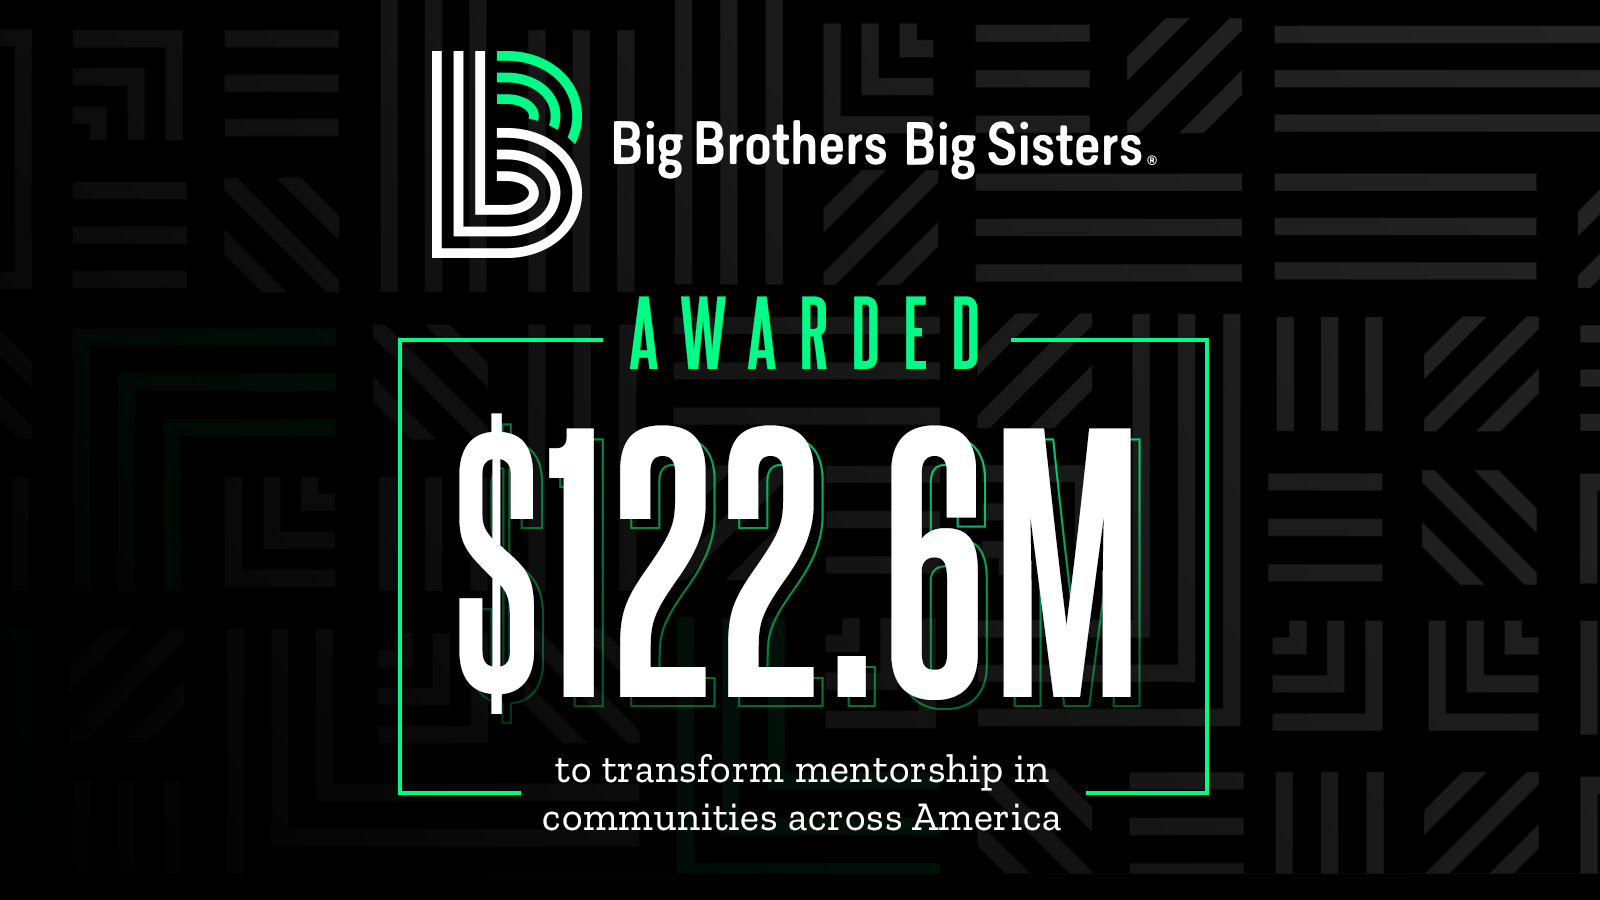 Lids and Big Brothers Big Sisters of America Partner Together for